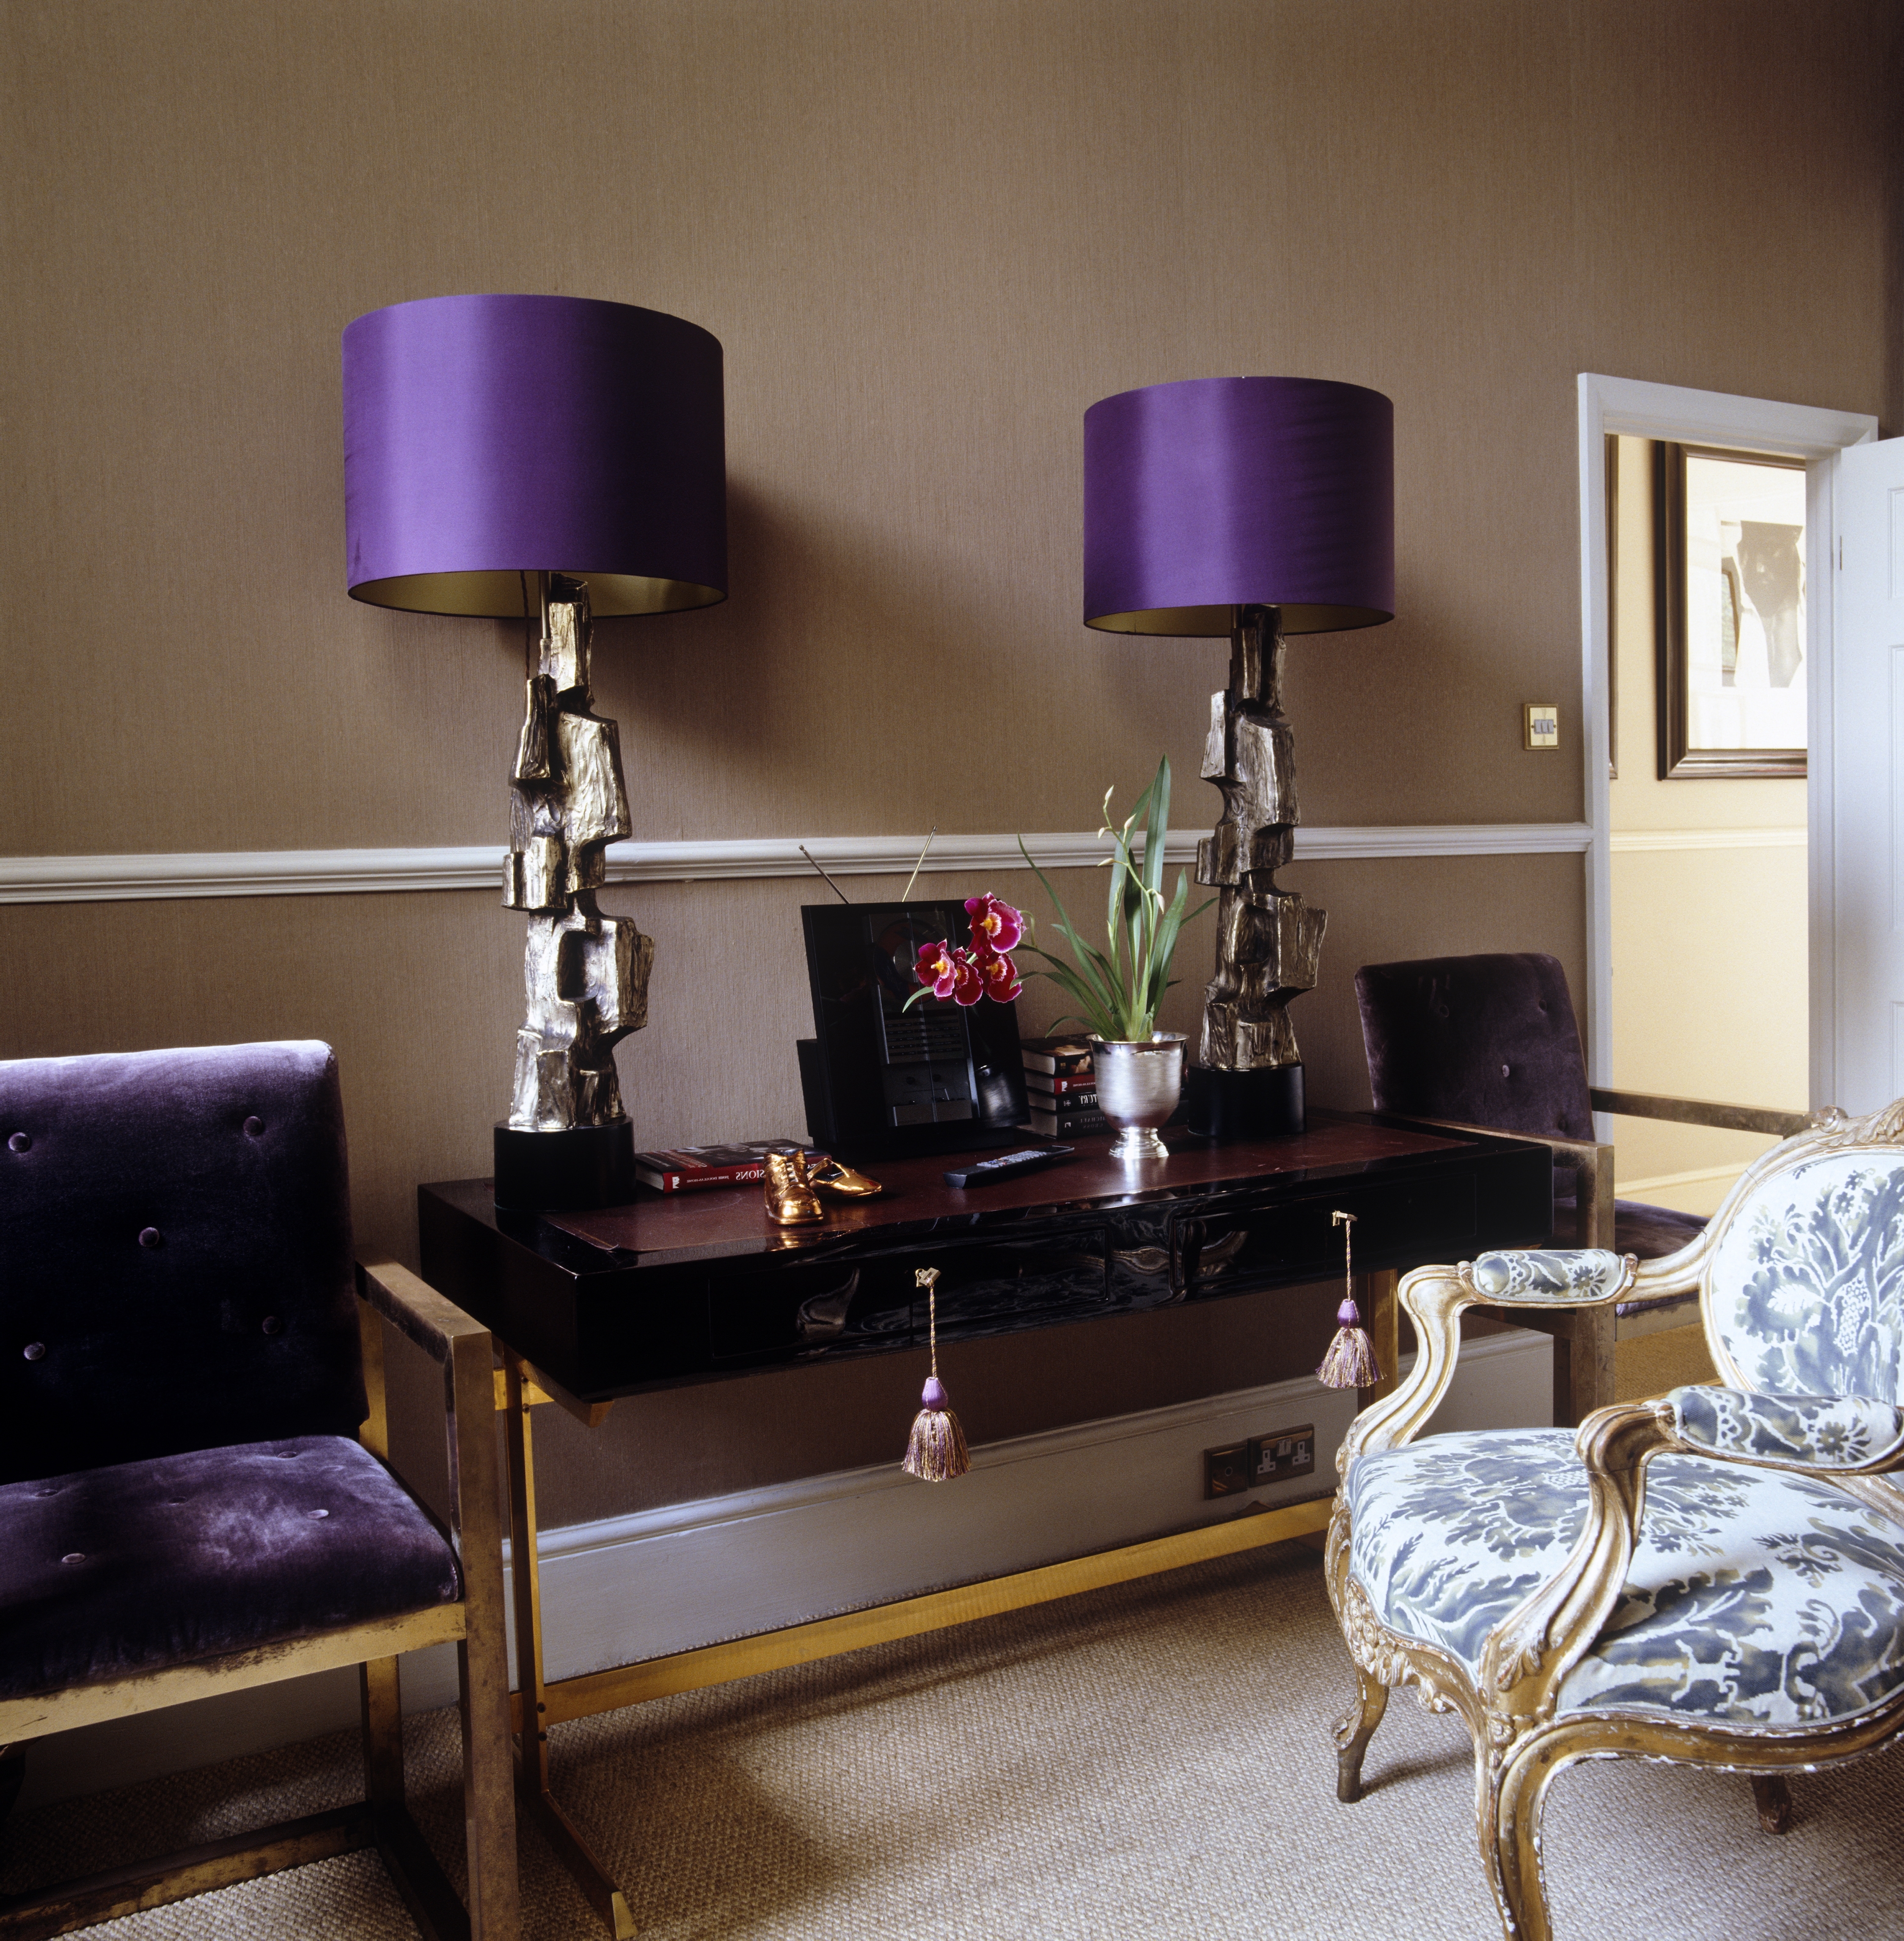 Selected photo of purple living room table lamps